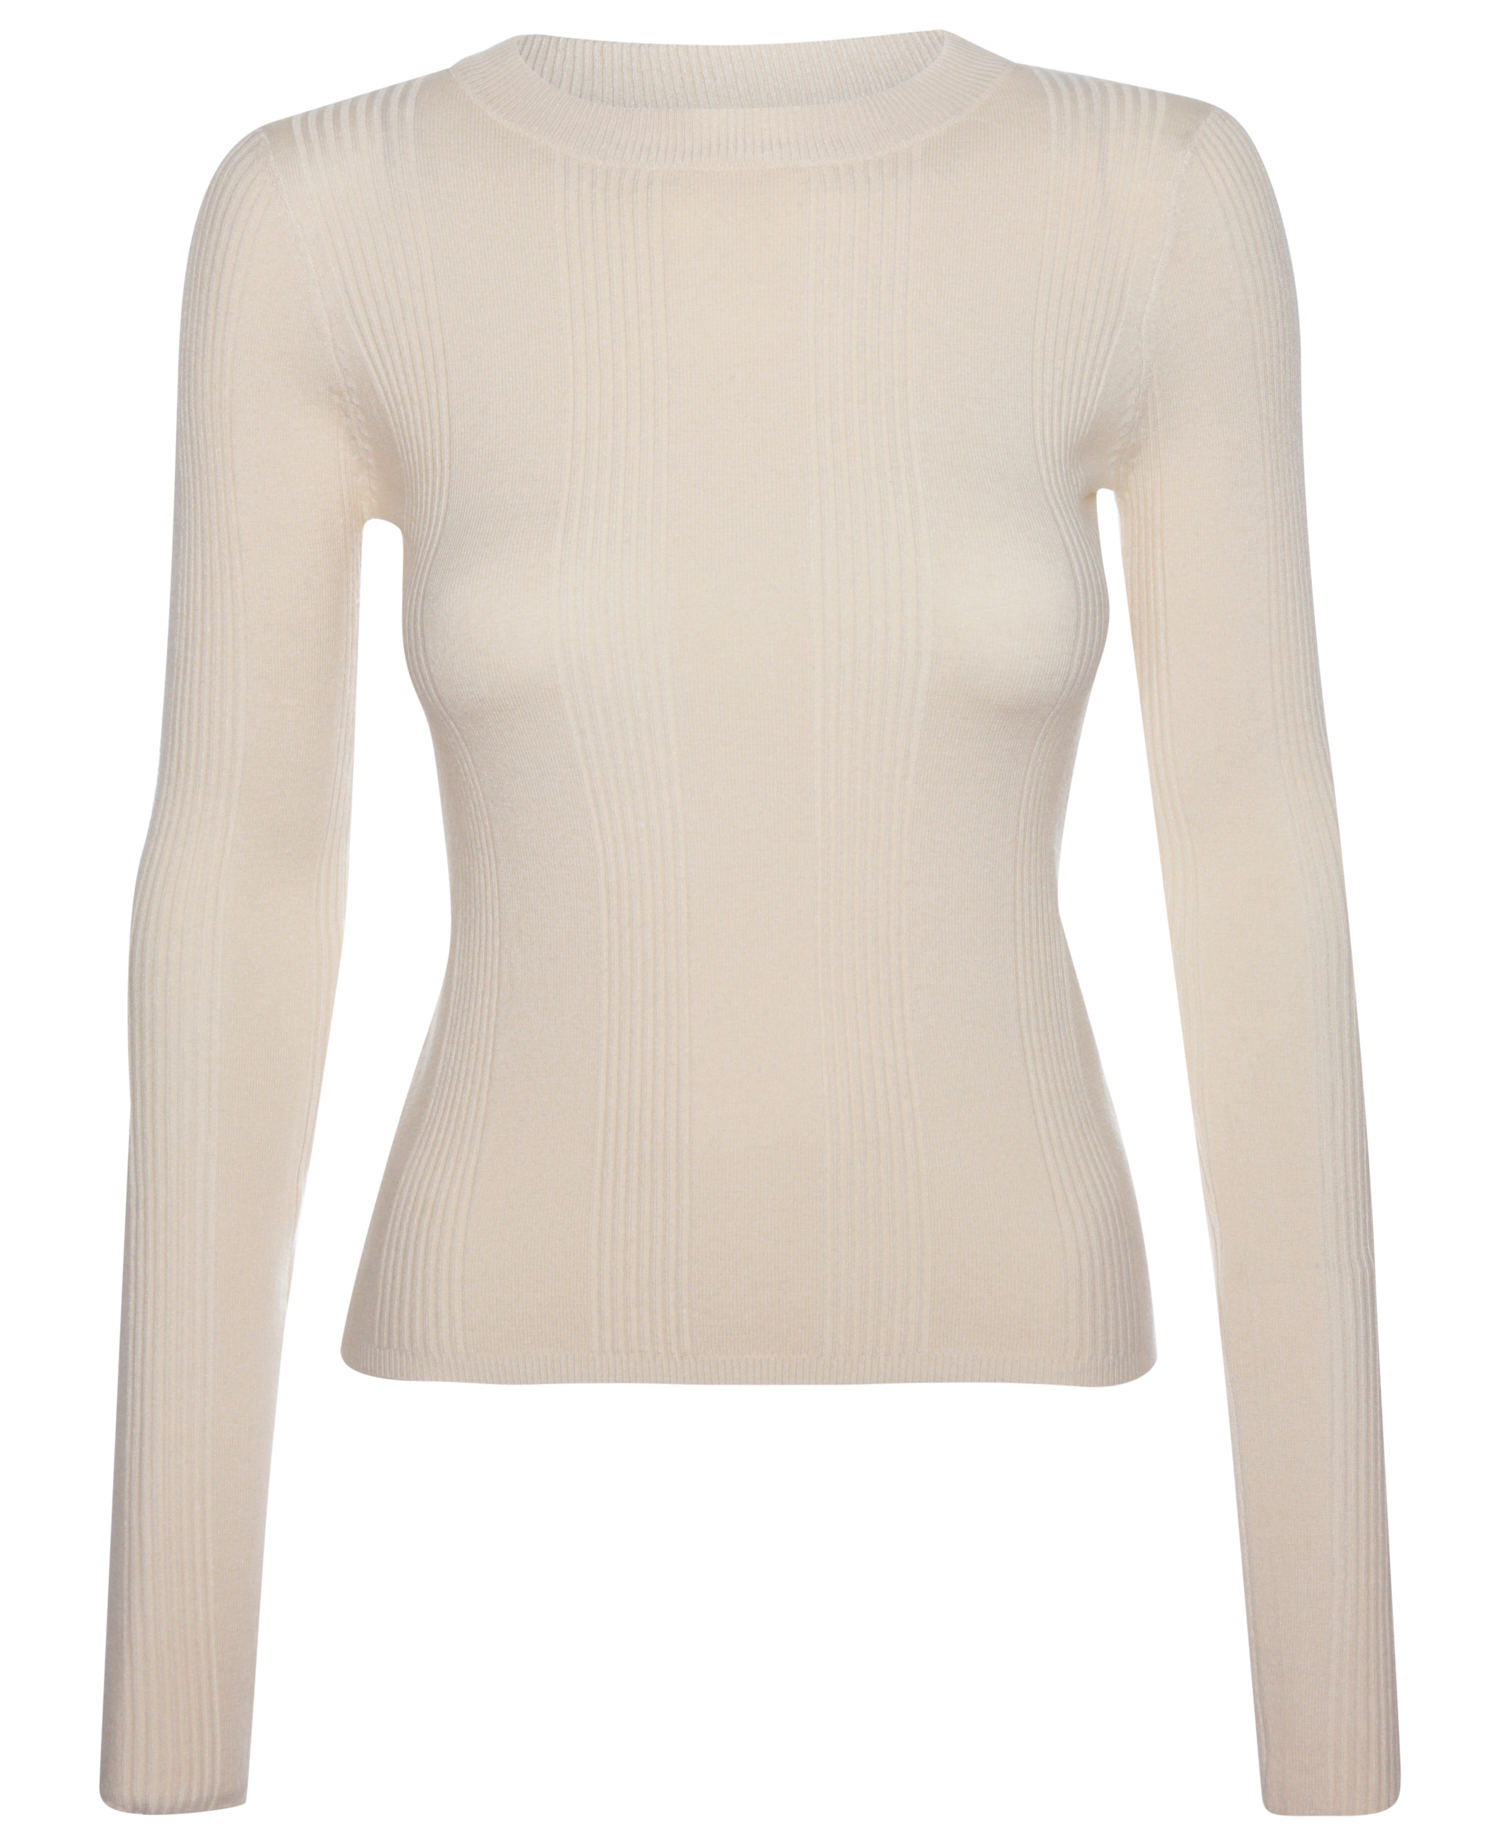 Textured Long Sleeve Knit Top